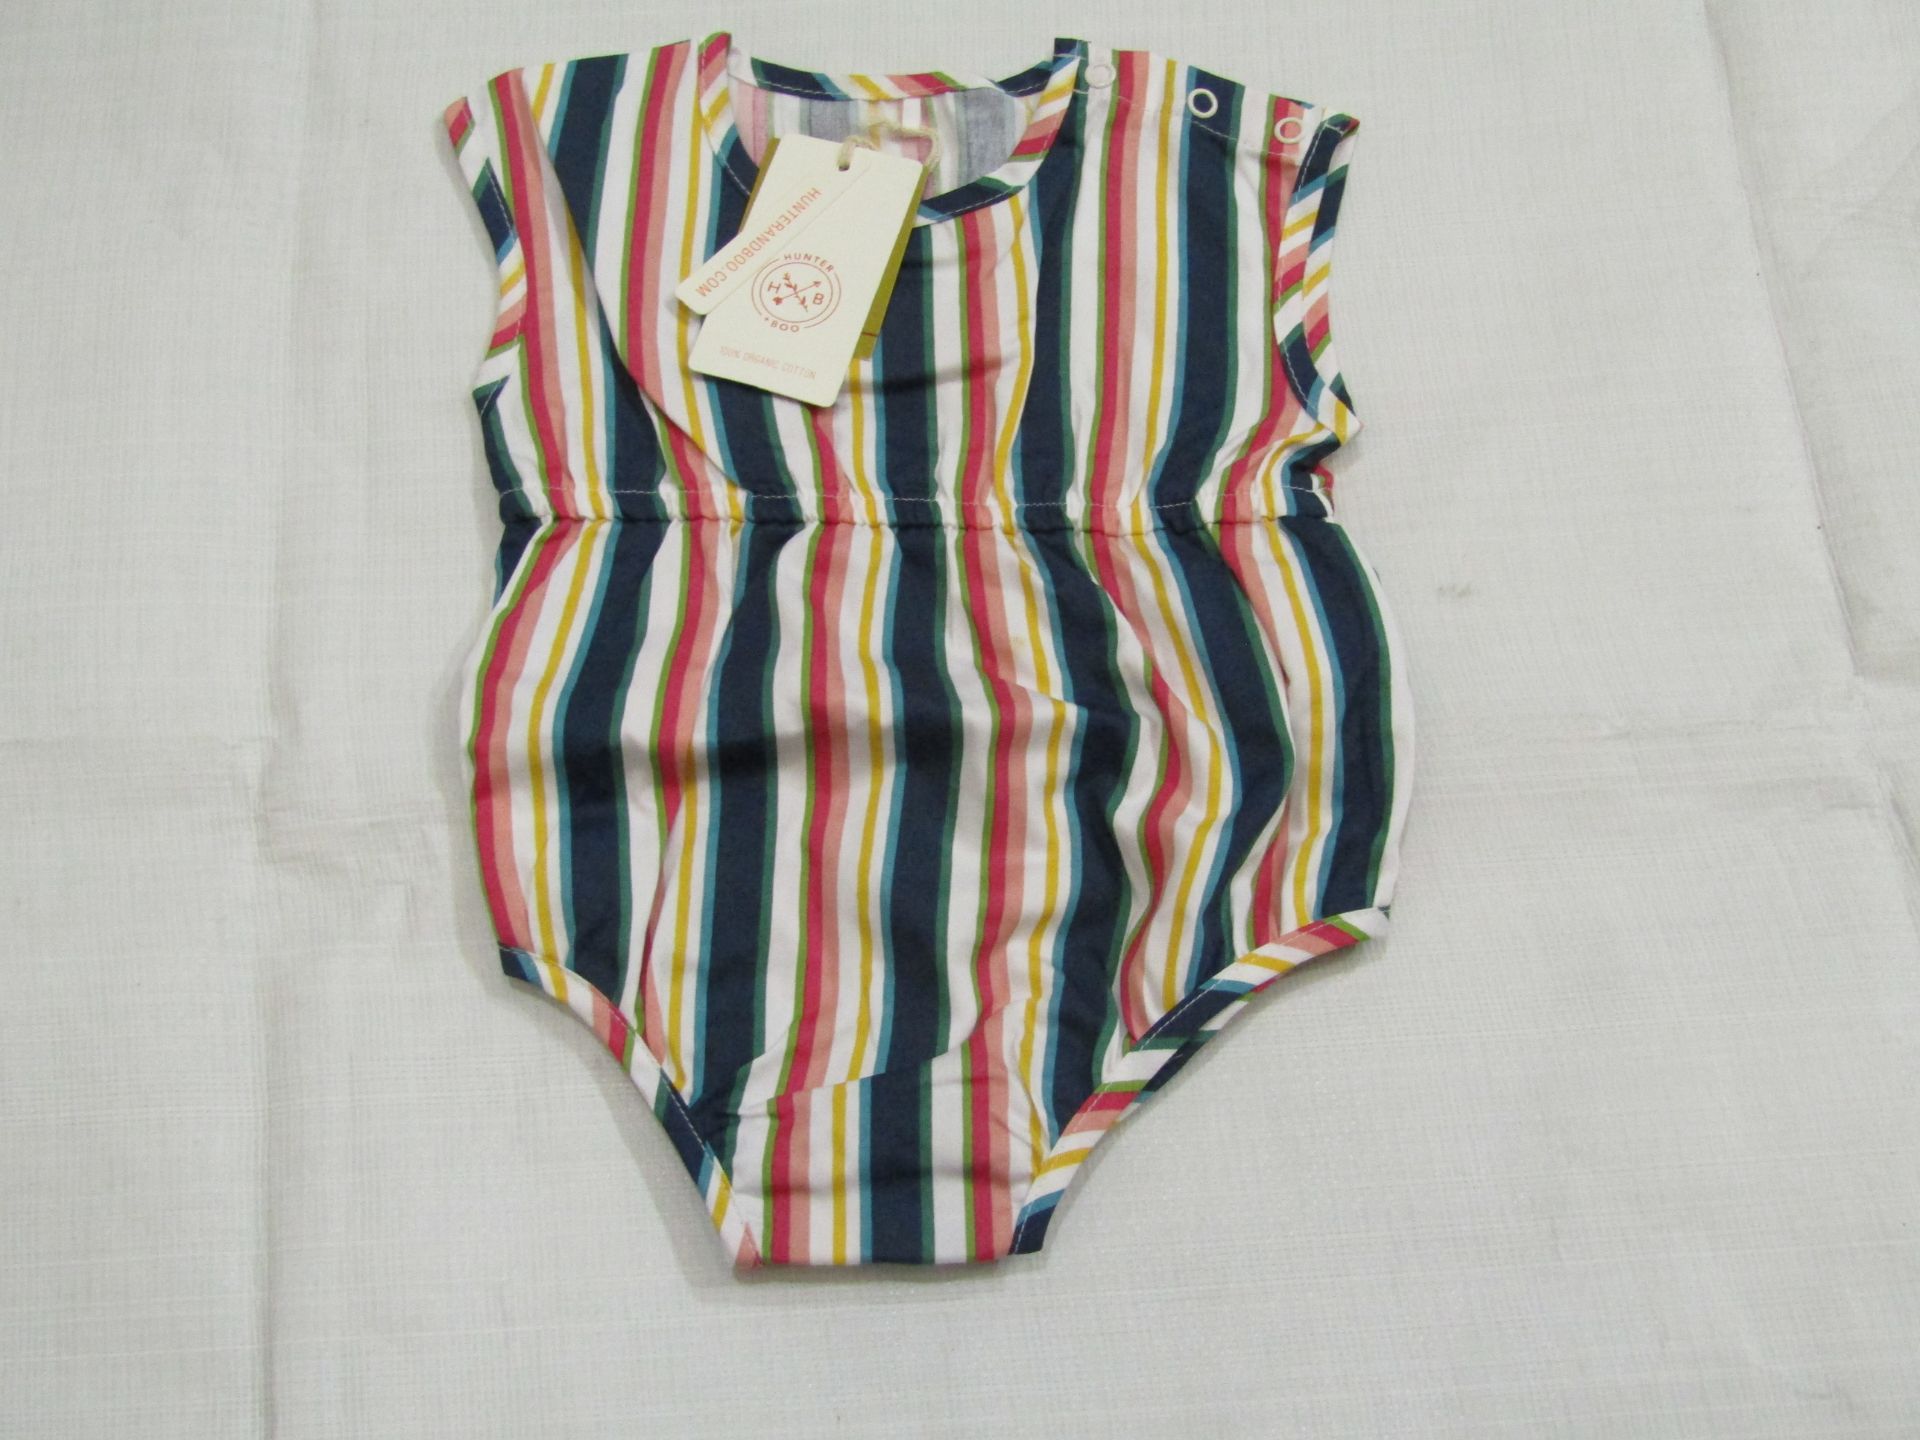 Hunter & Boo Helter Skelter Playsuit Aged 3-6 Months New & Packaged RRP £21